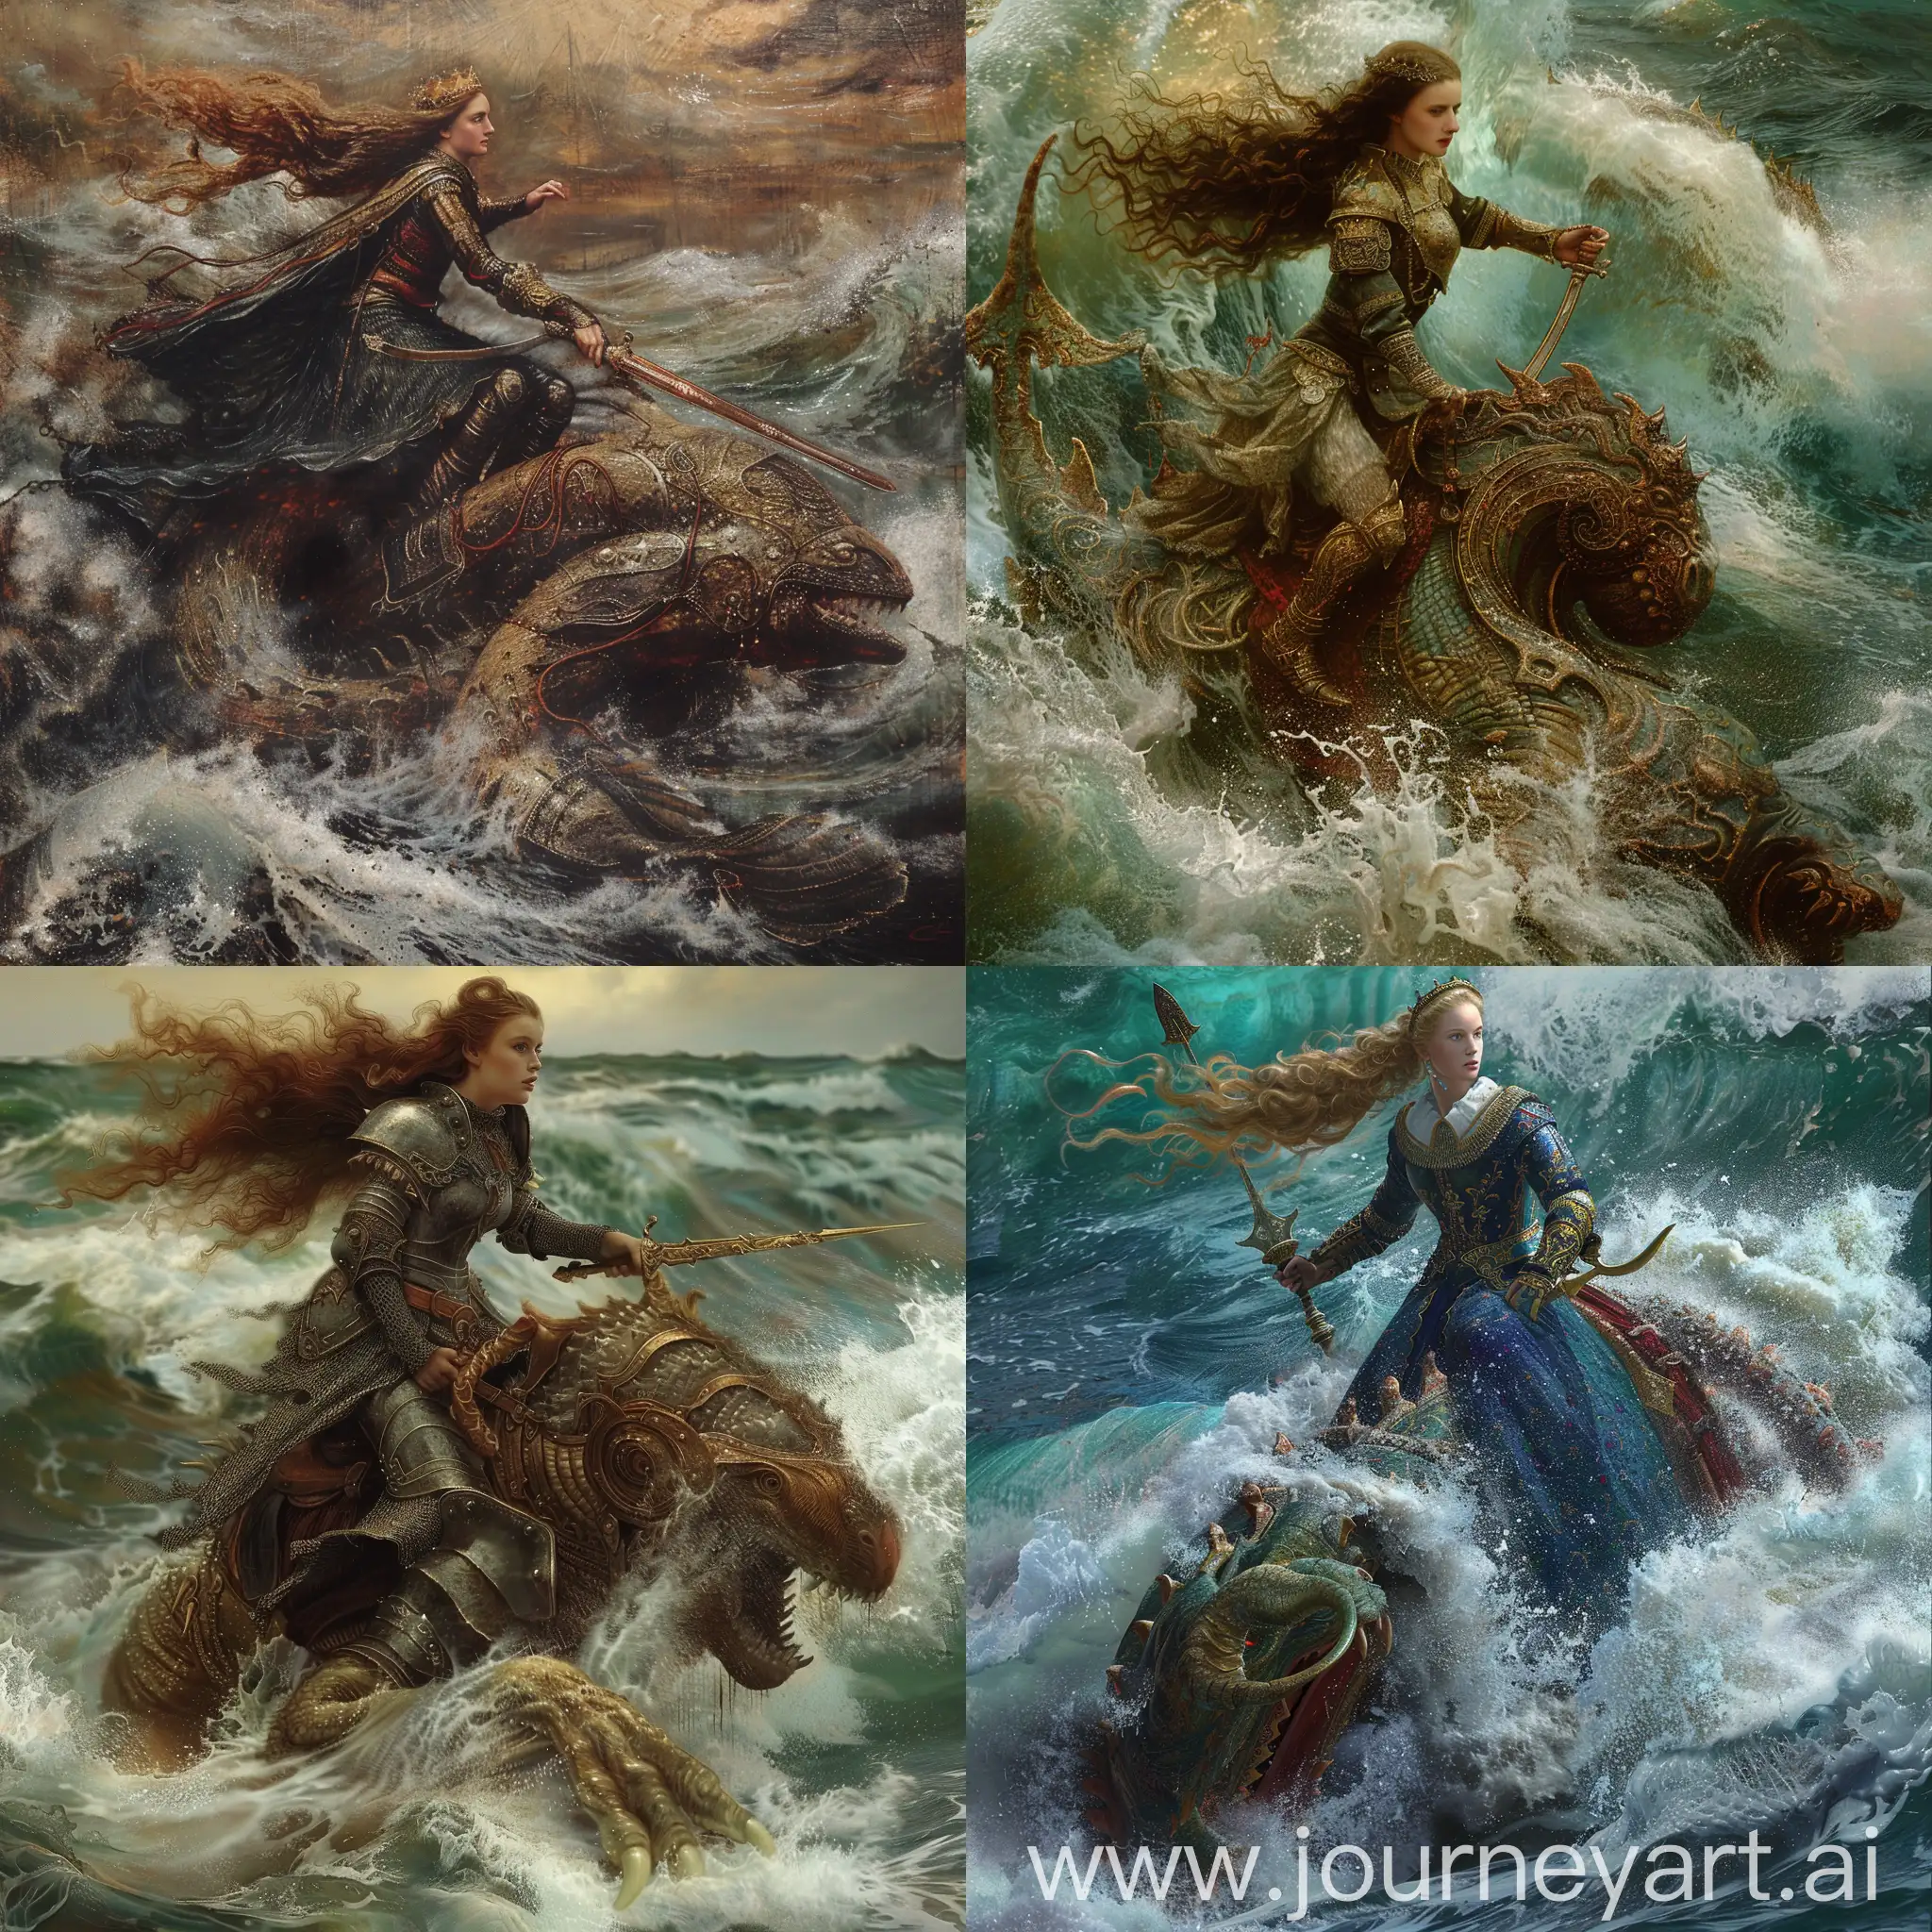 A pre Raphaelite image of a beautiful medieval warrior maiden riding a sea monster through rough waves. Beautiful magical mysterious fantasy surreal highly detailed